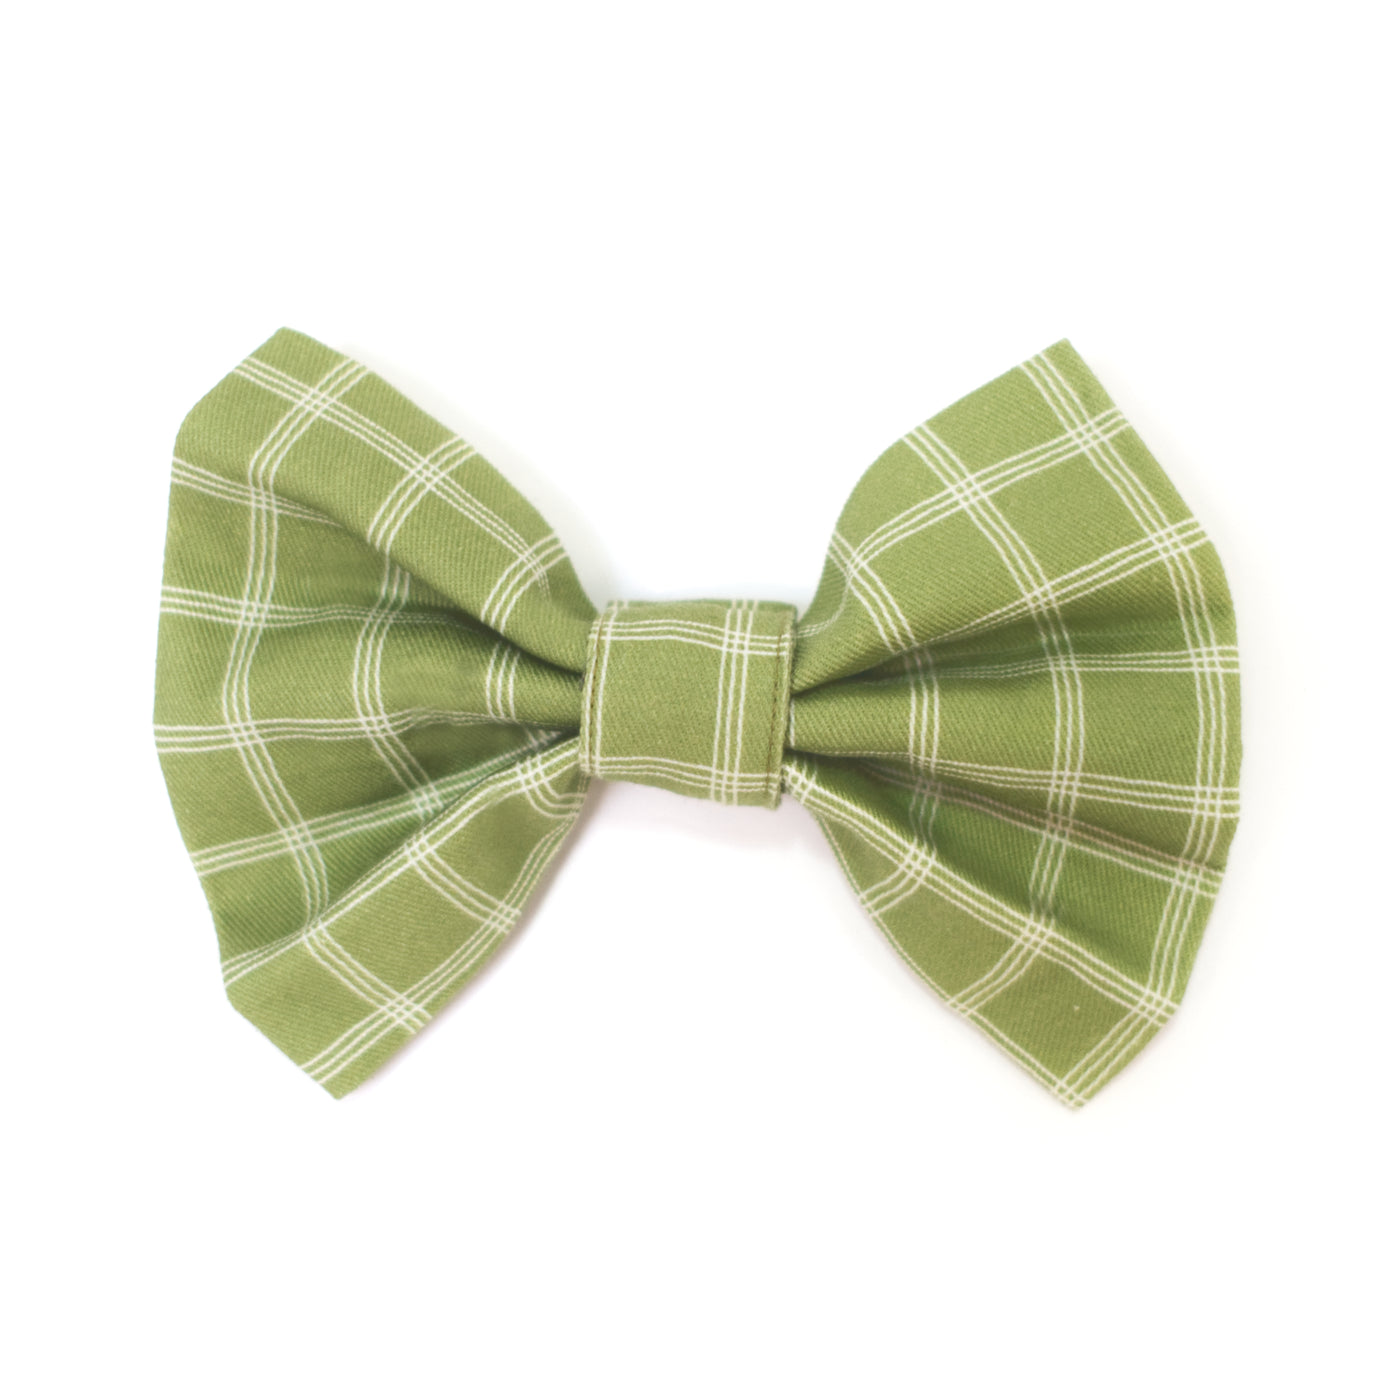 Olive green plaid dog bowtie for collars and harnesses